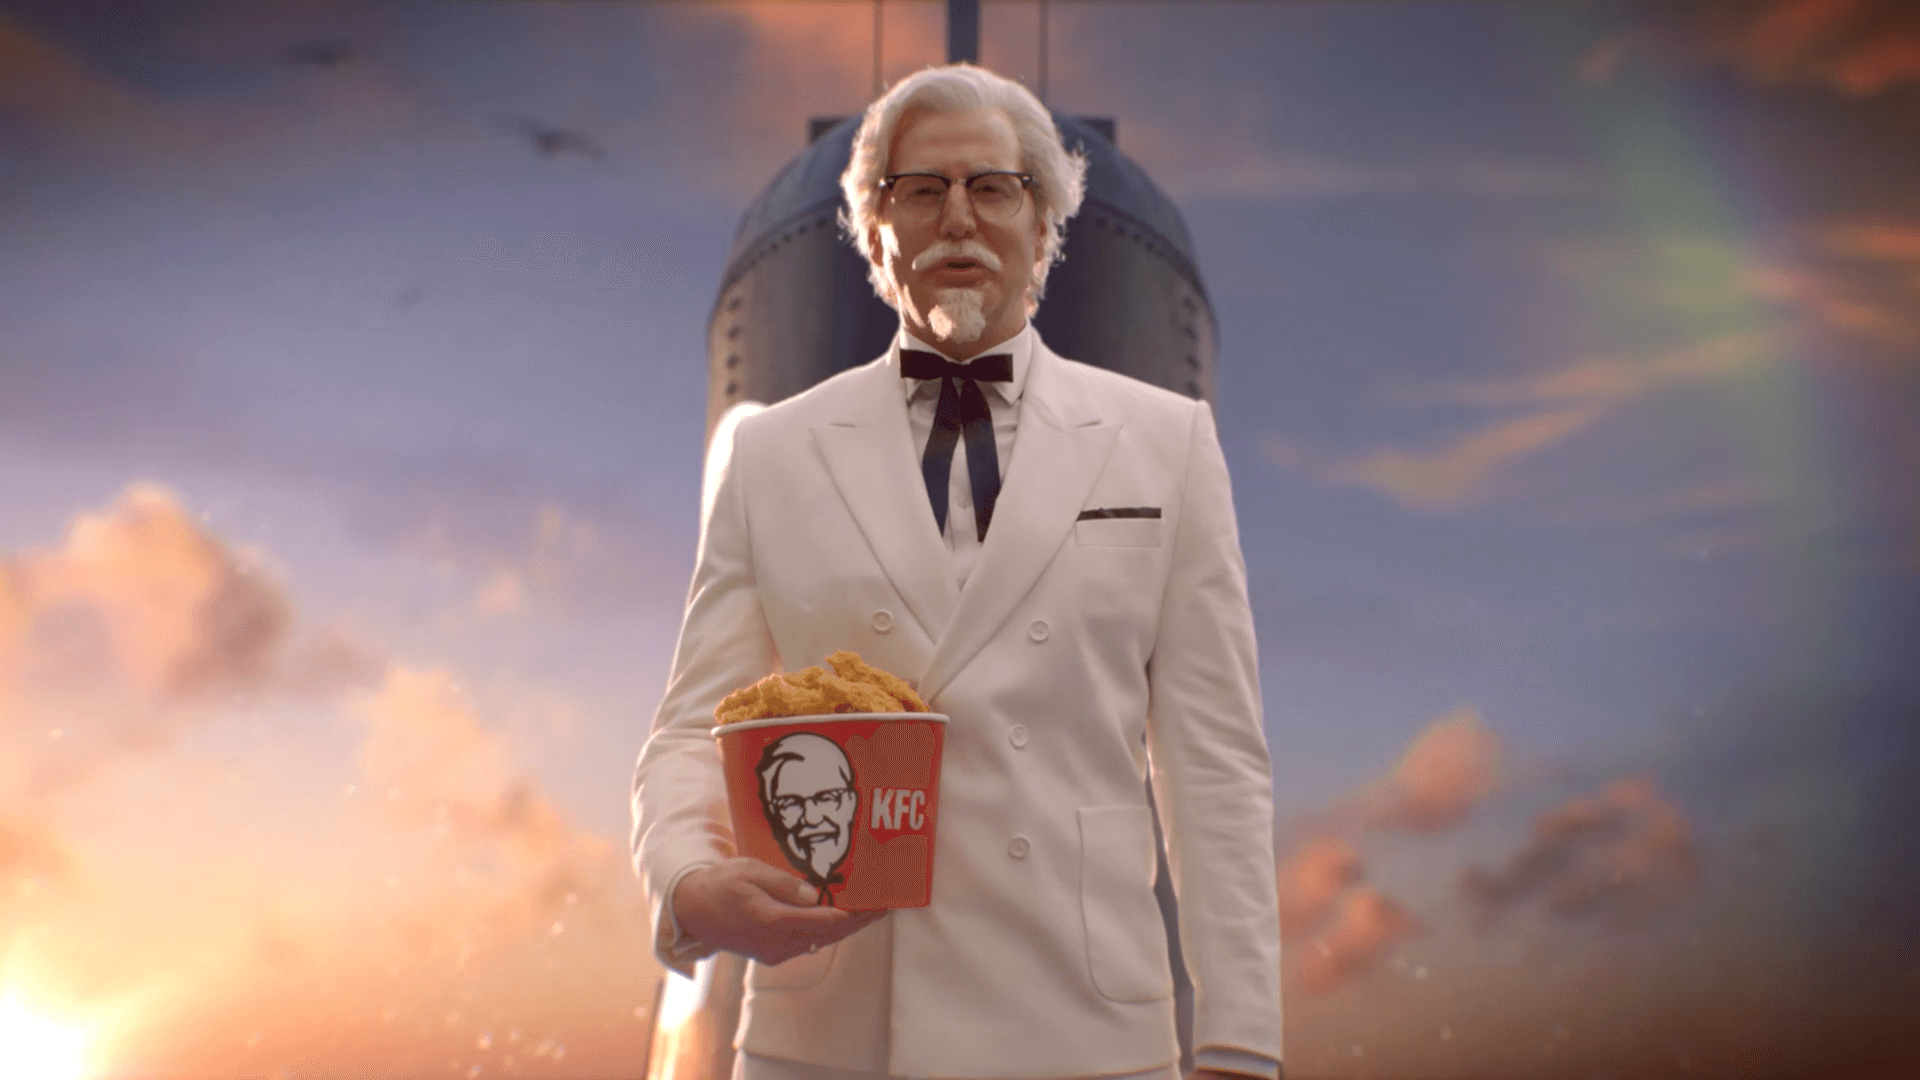 COLONEL SANDERS ARRIVES IN FRANCE